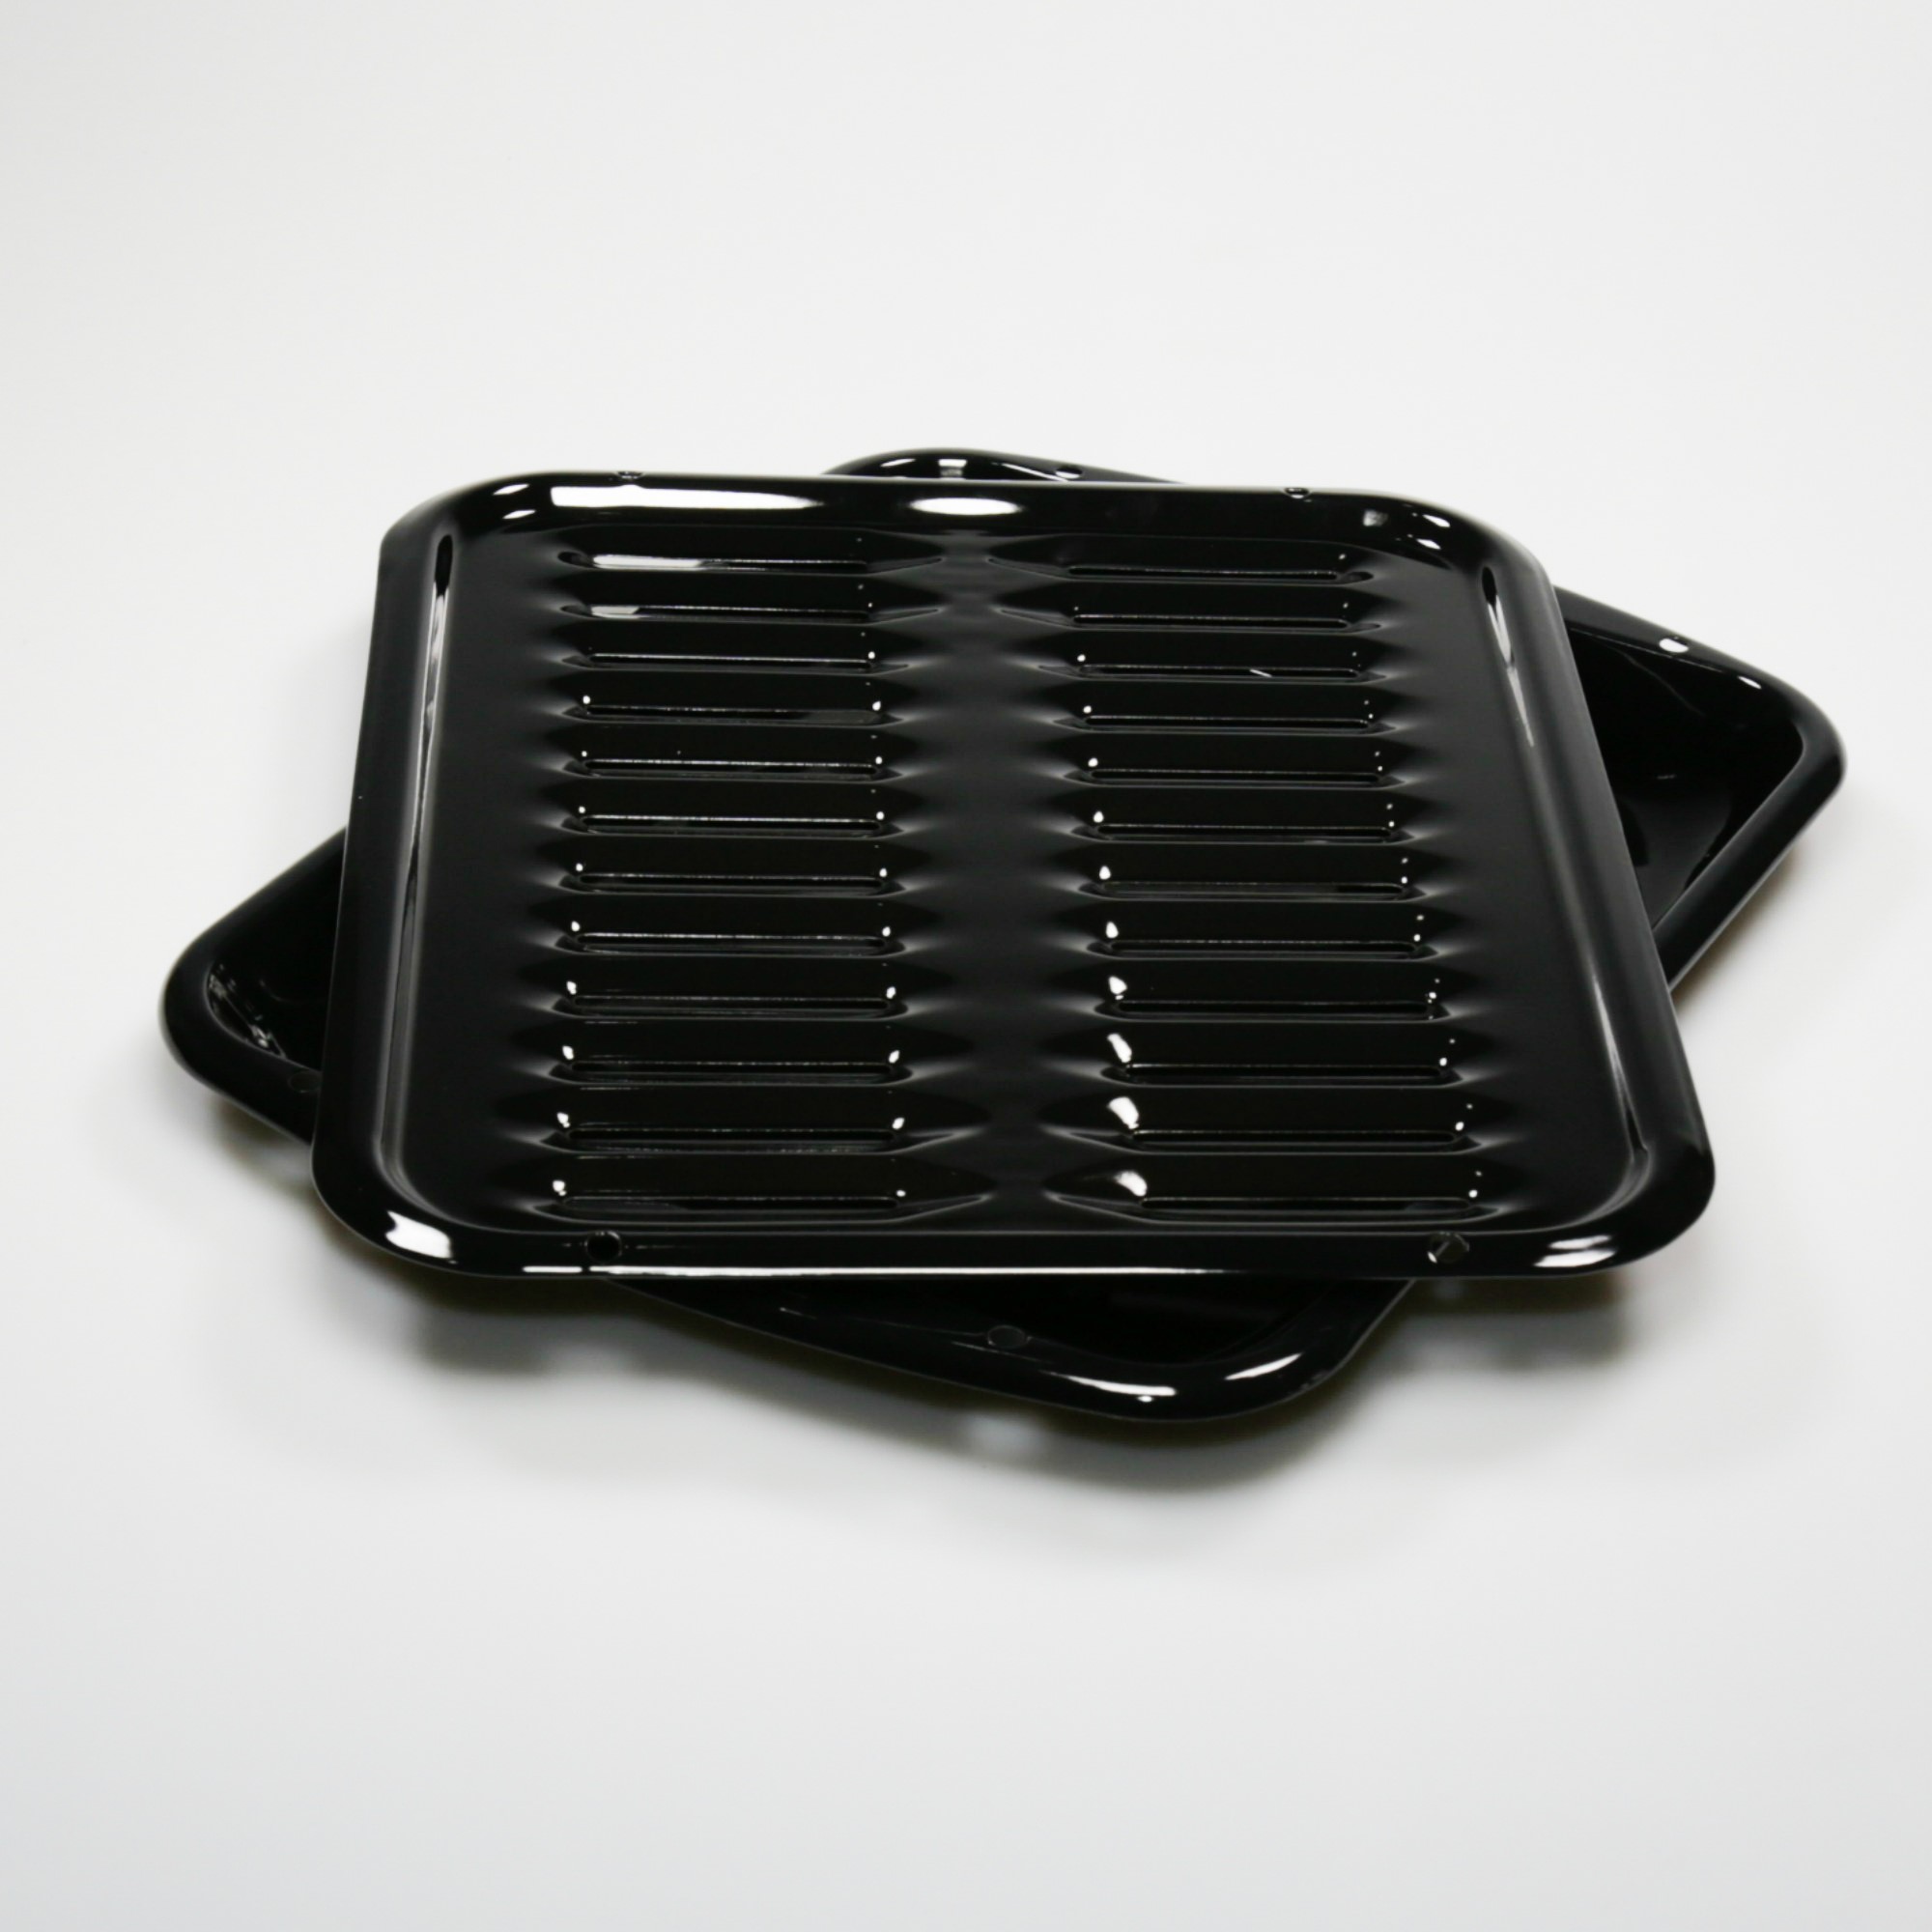 Black Kitchen Basics 101 Replacement for Whirlpool 4396923 Porcelain Broiler Pan and Grill